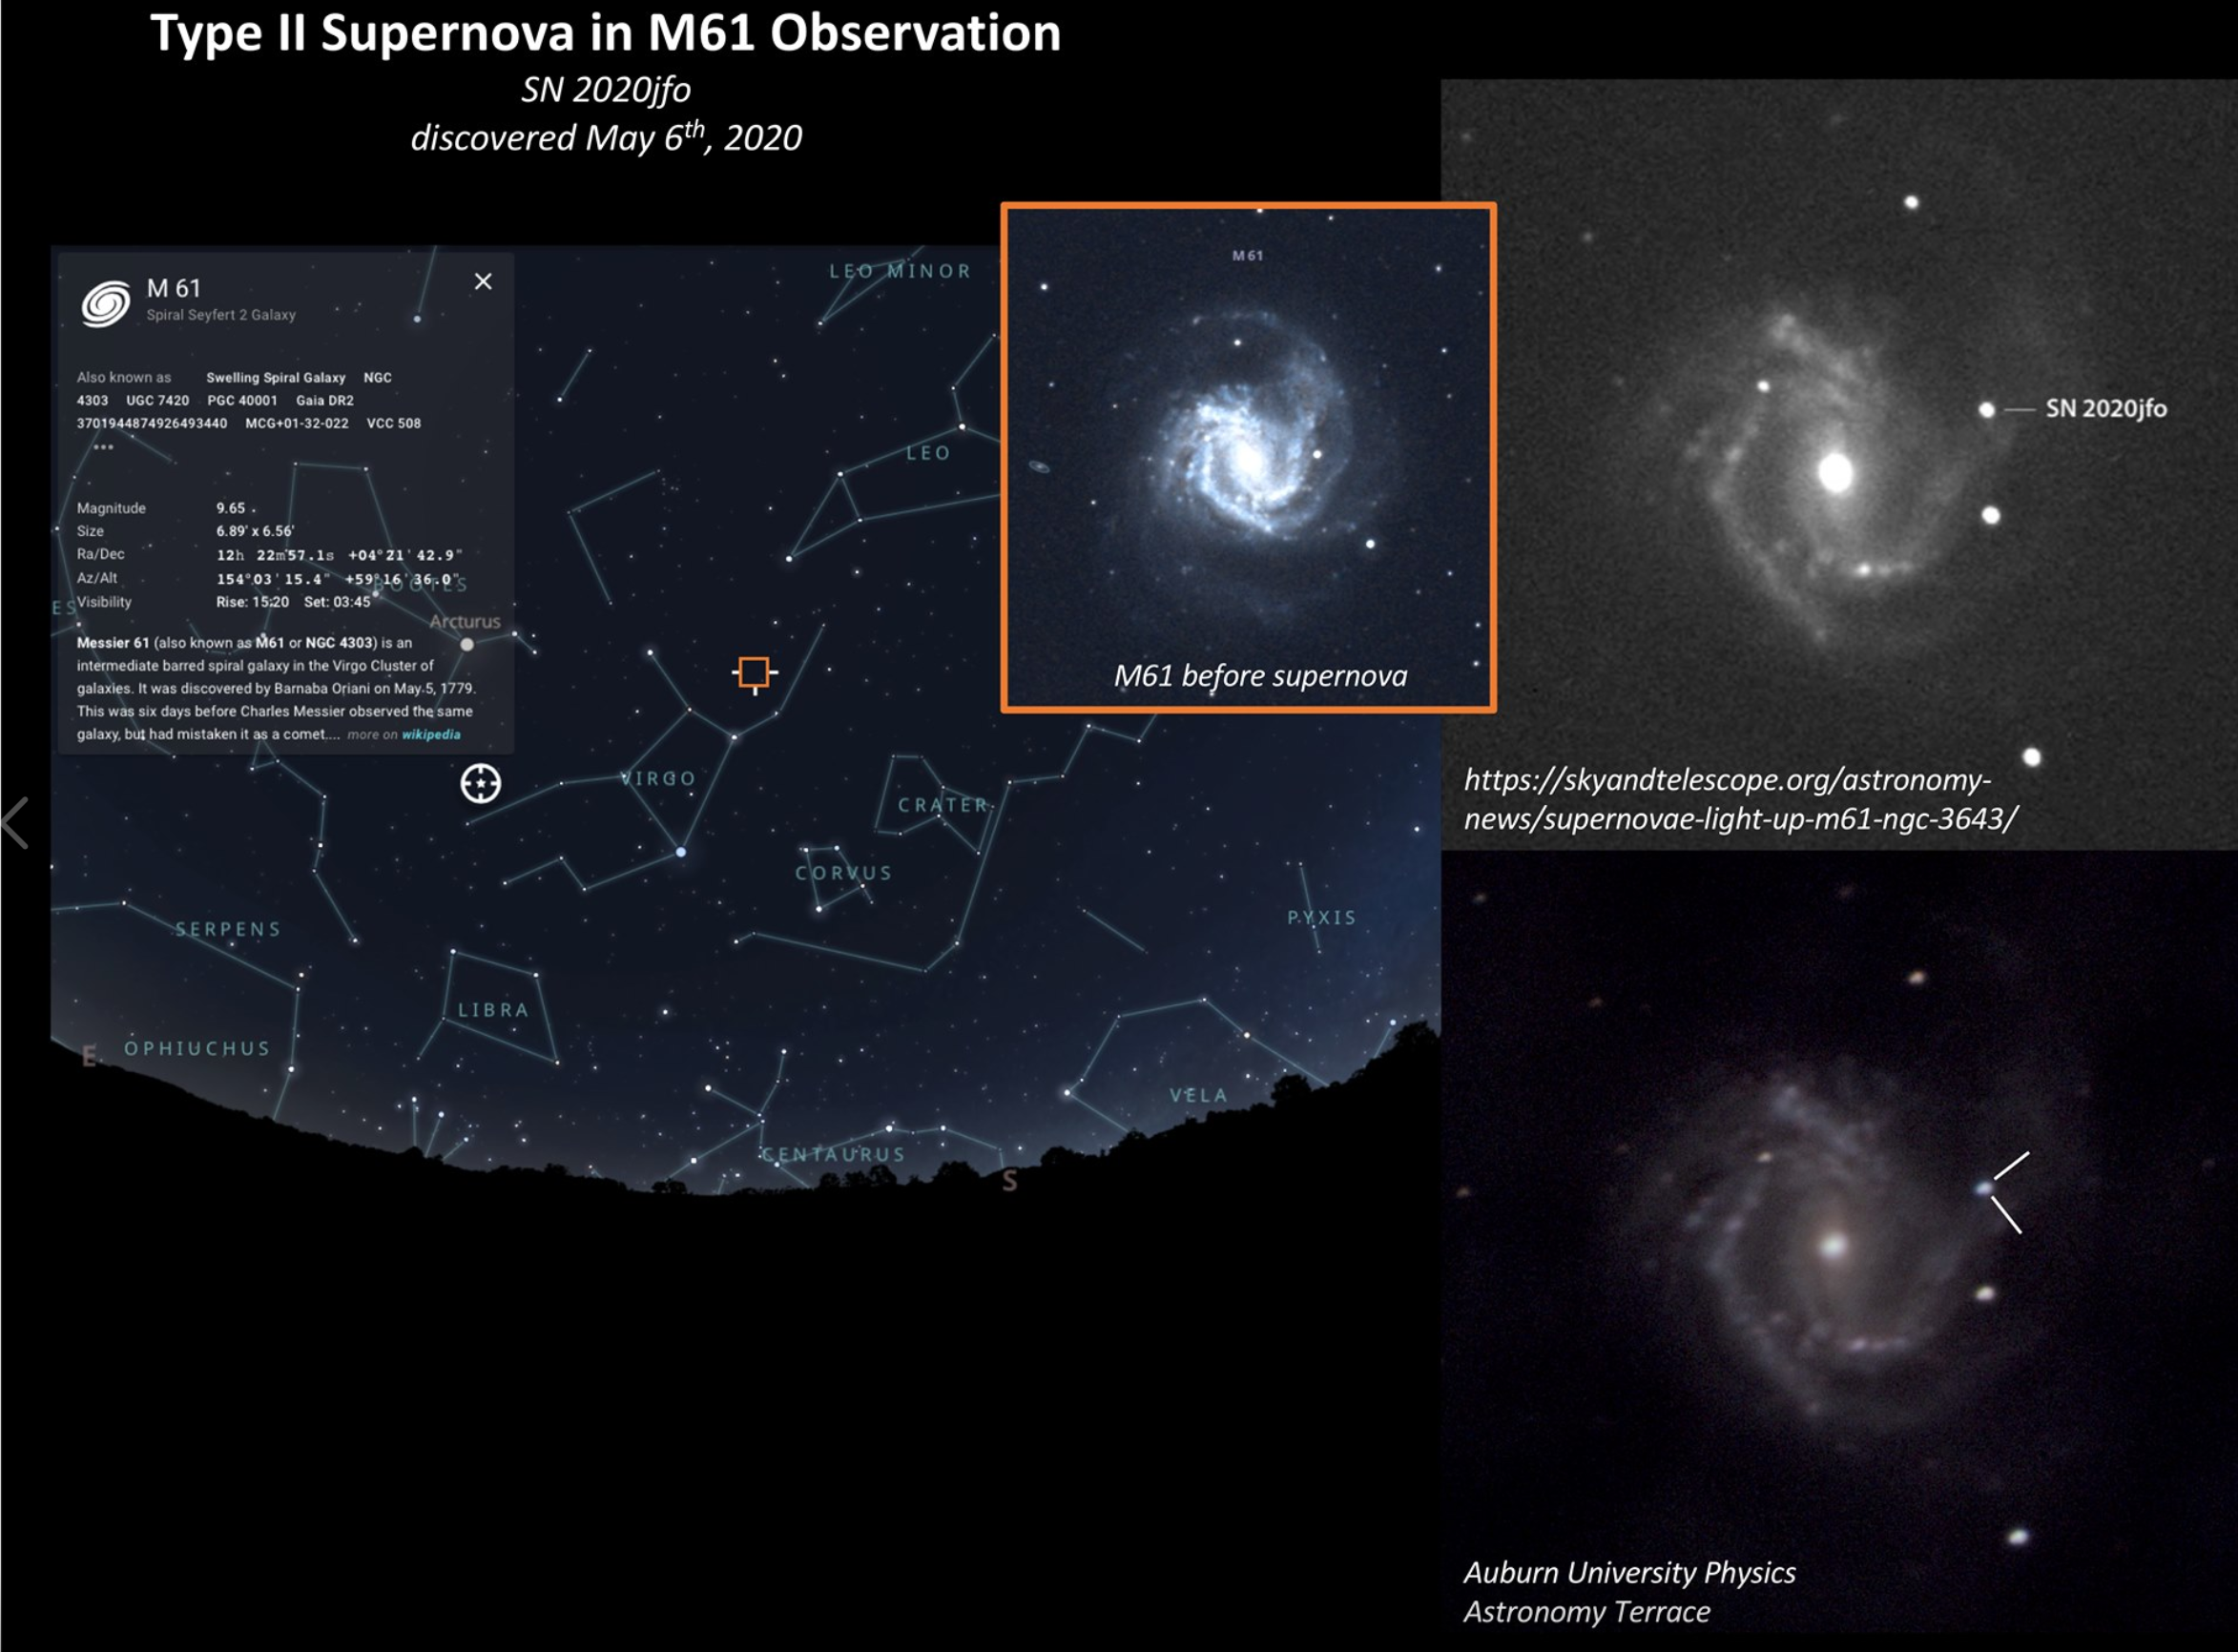 A supernova was discovered by the Zwicky Transient Facility on May 6th in the M61 Galaxy.